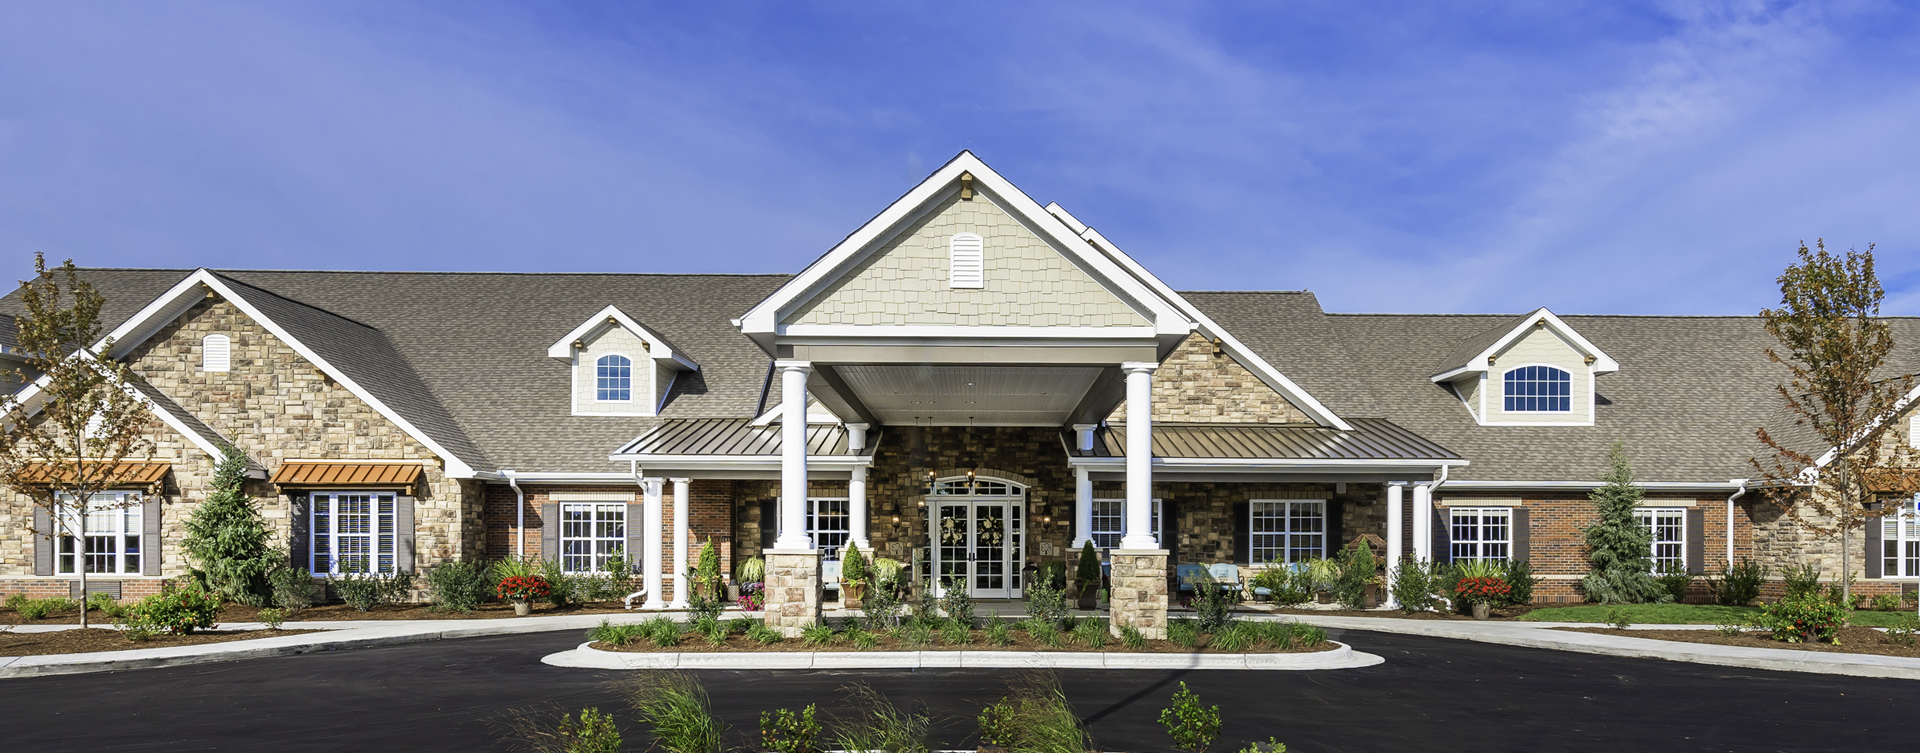 Stop by for a tour at  Bickford of Shelby Township